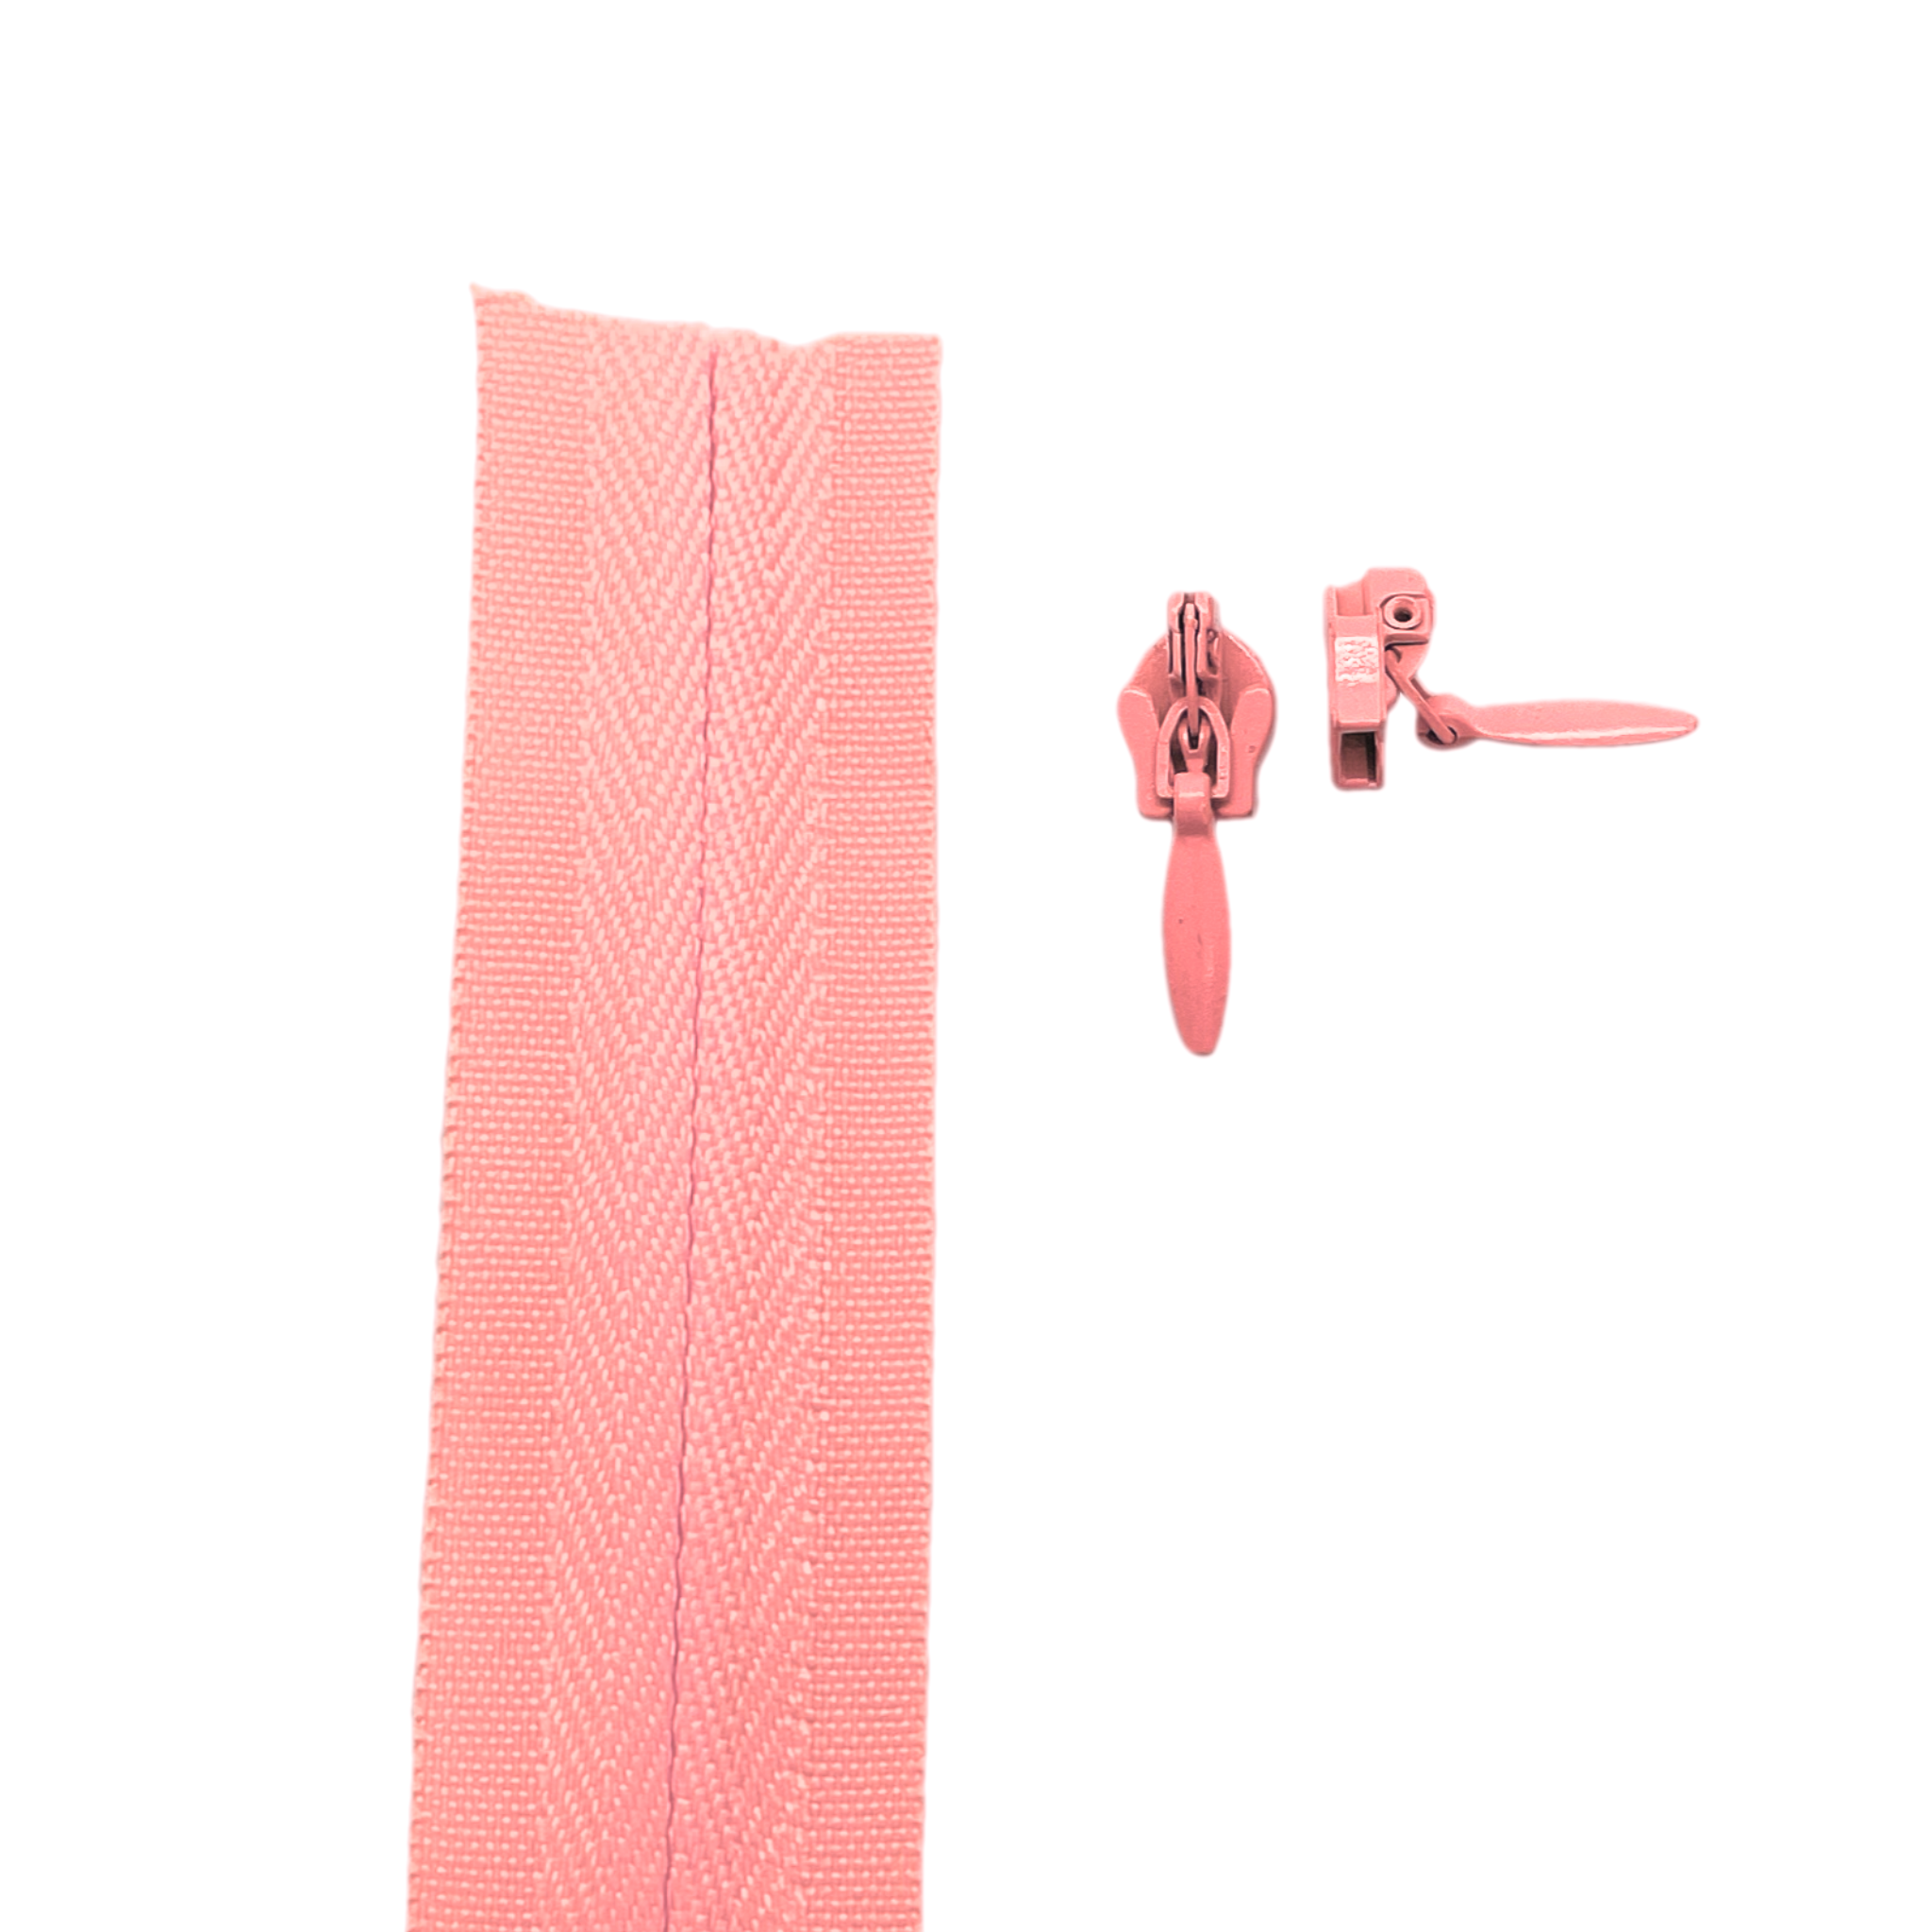 coral Invisible continuous zipper roll in long chain style with sliders of 2 per metre